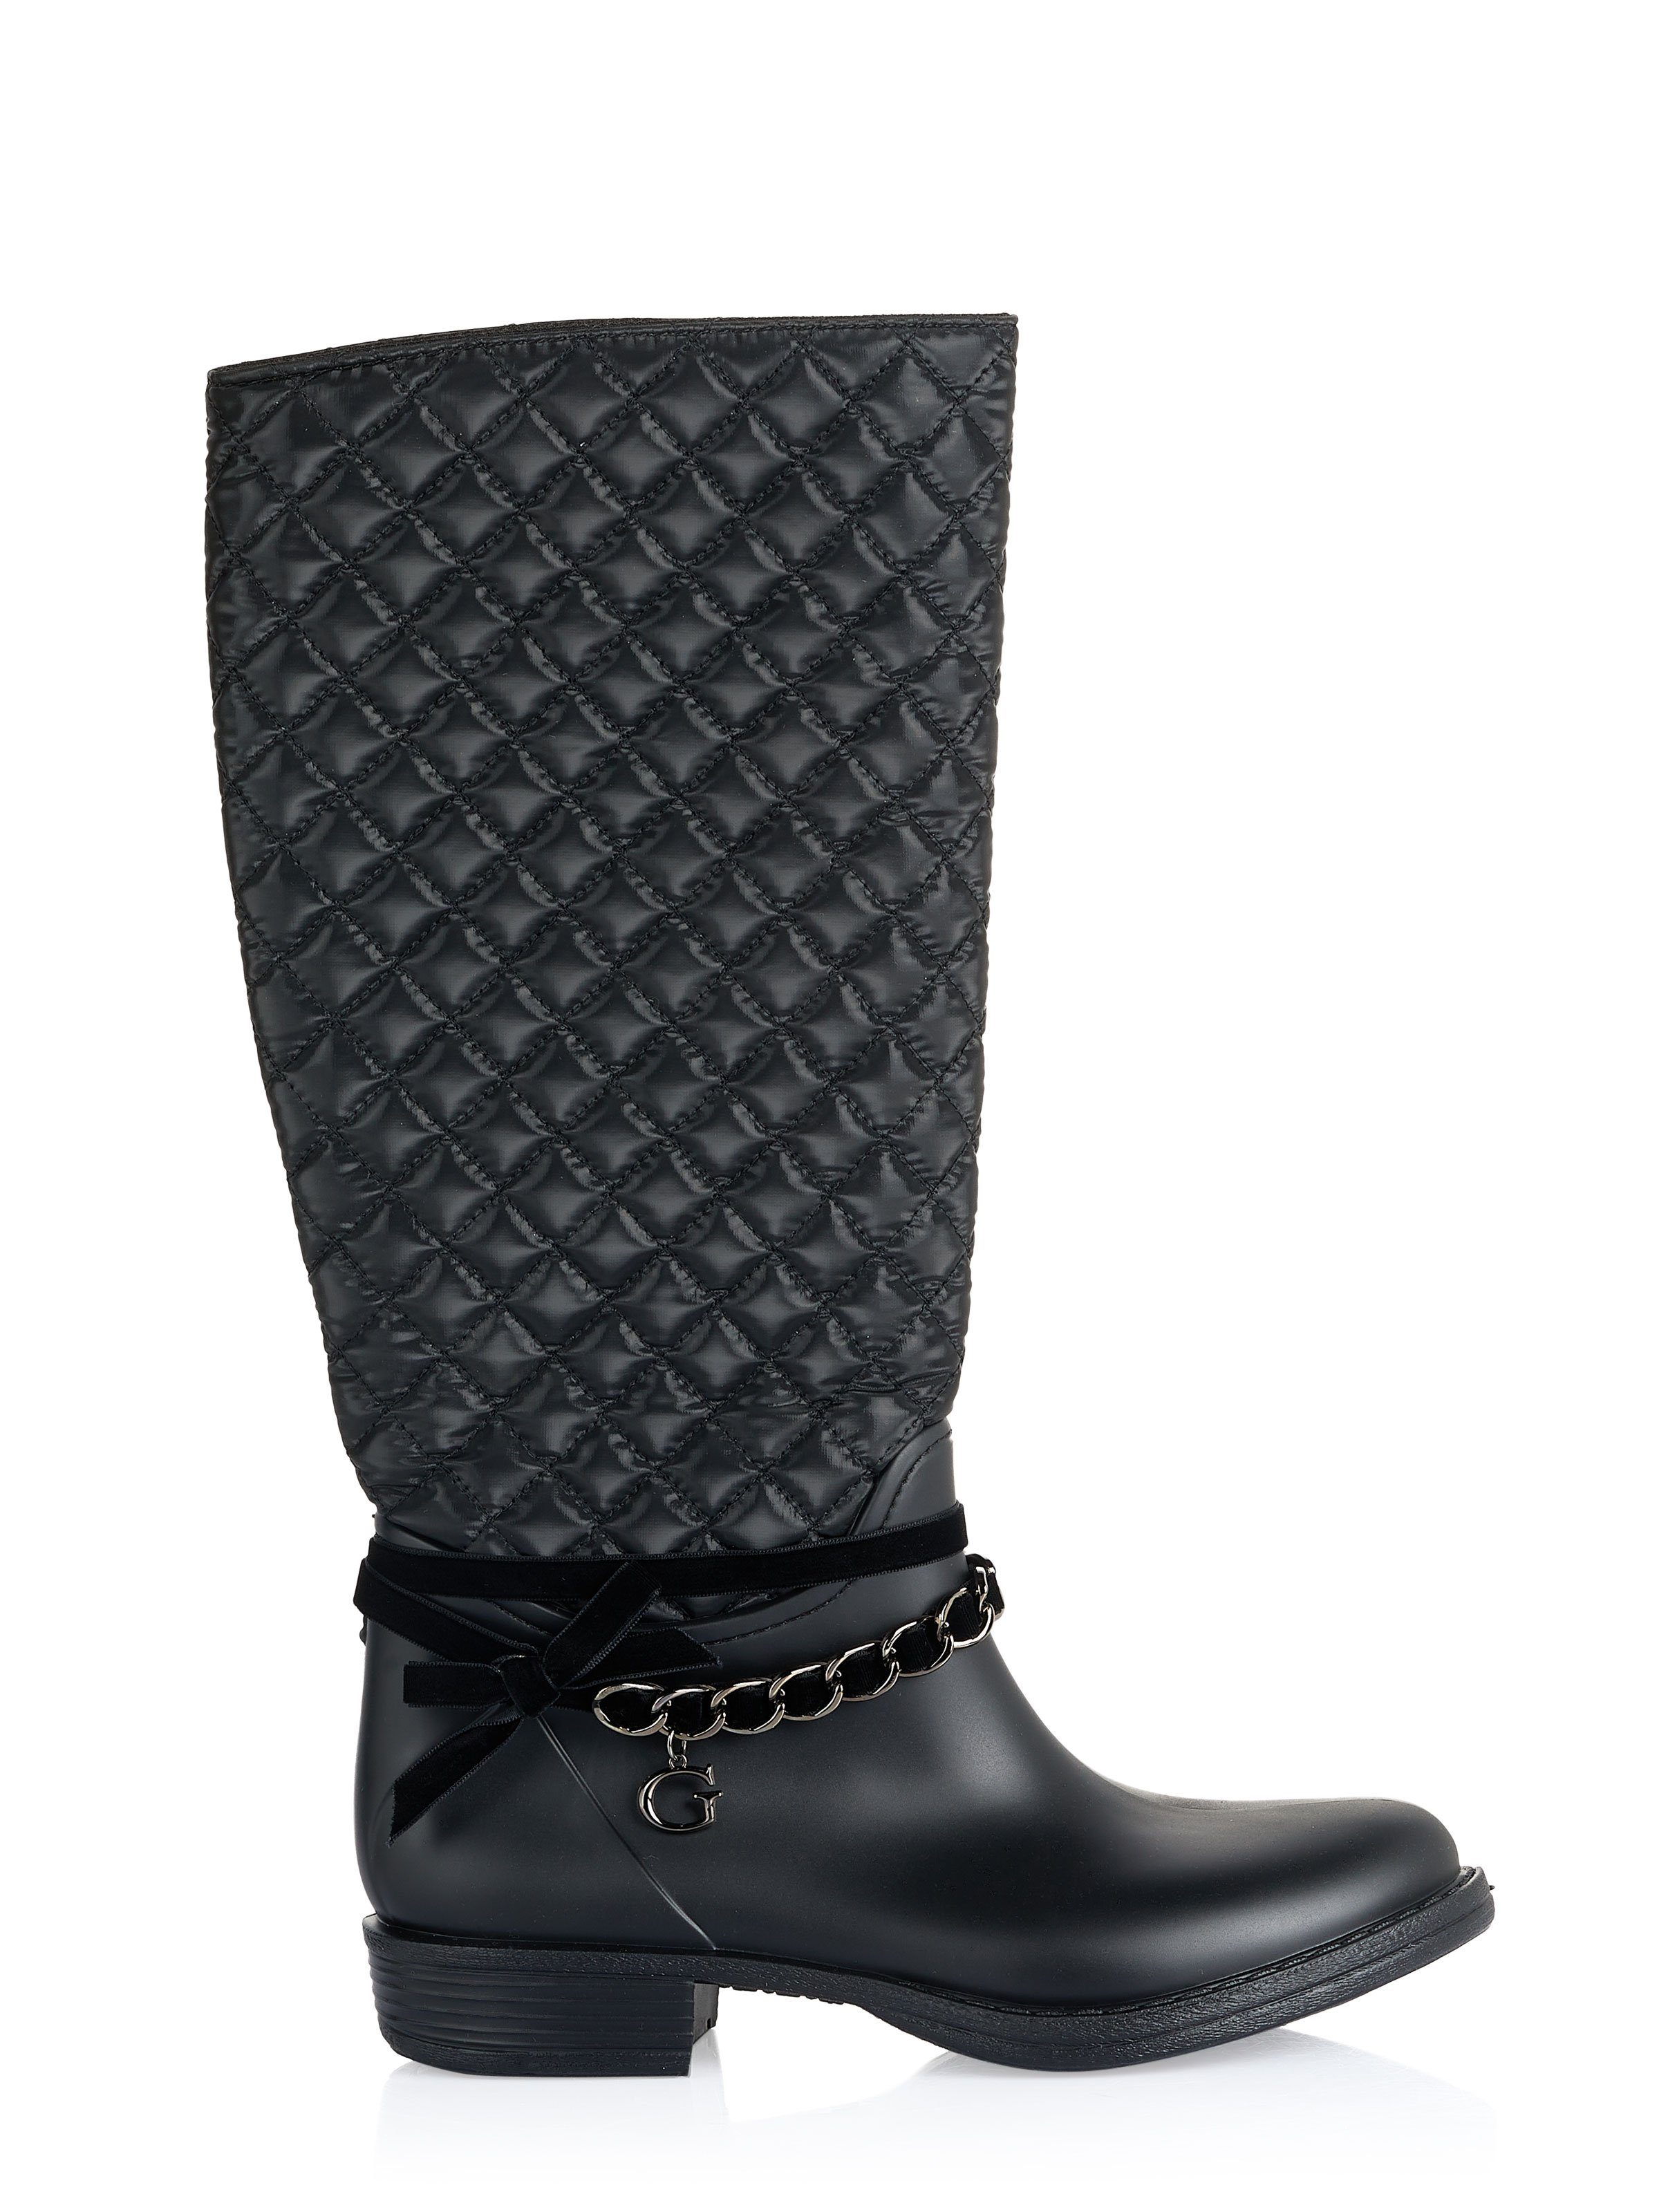 Guess GUESS Stiefel Stiefel